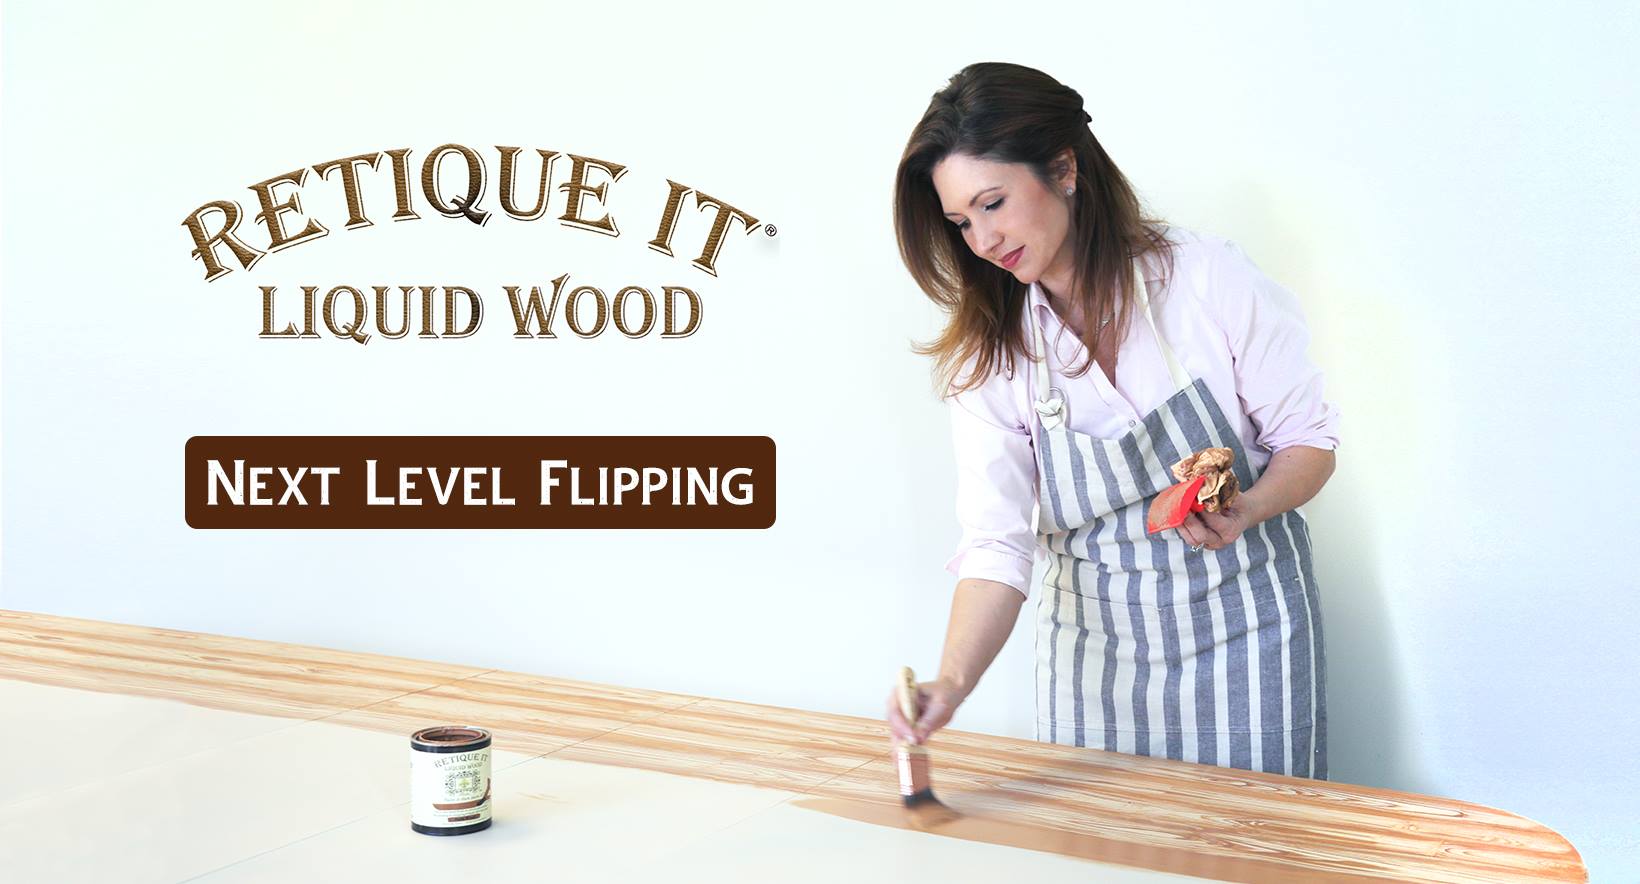 Join our new Facebook group, Next Level Flipping